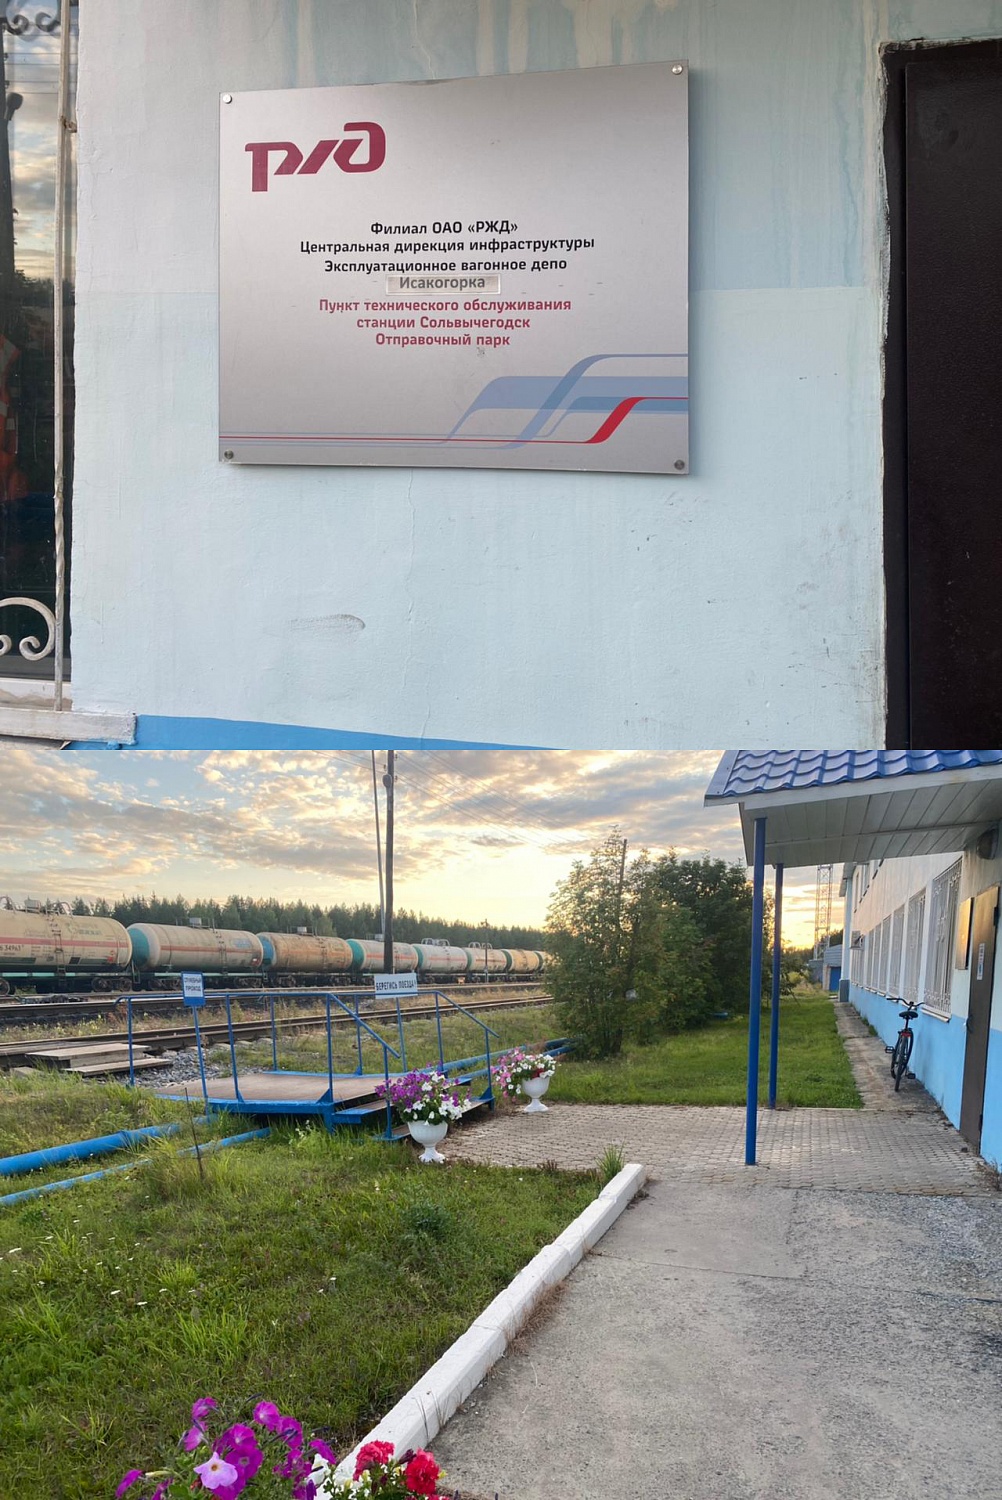 Applications of Bronya at the facilities of three branches of Russian Railways at once. (photo + video)